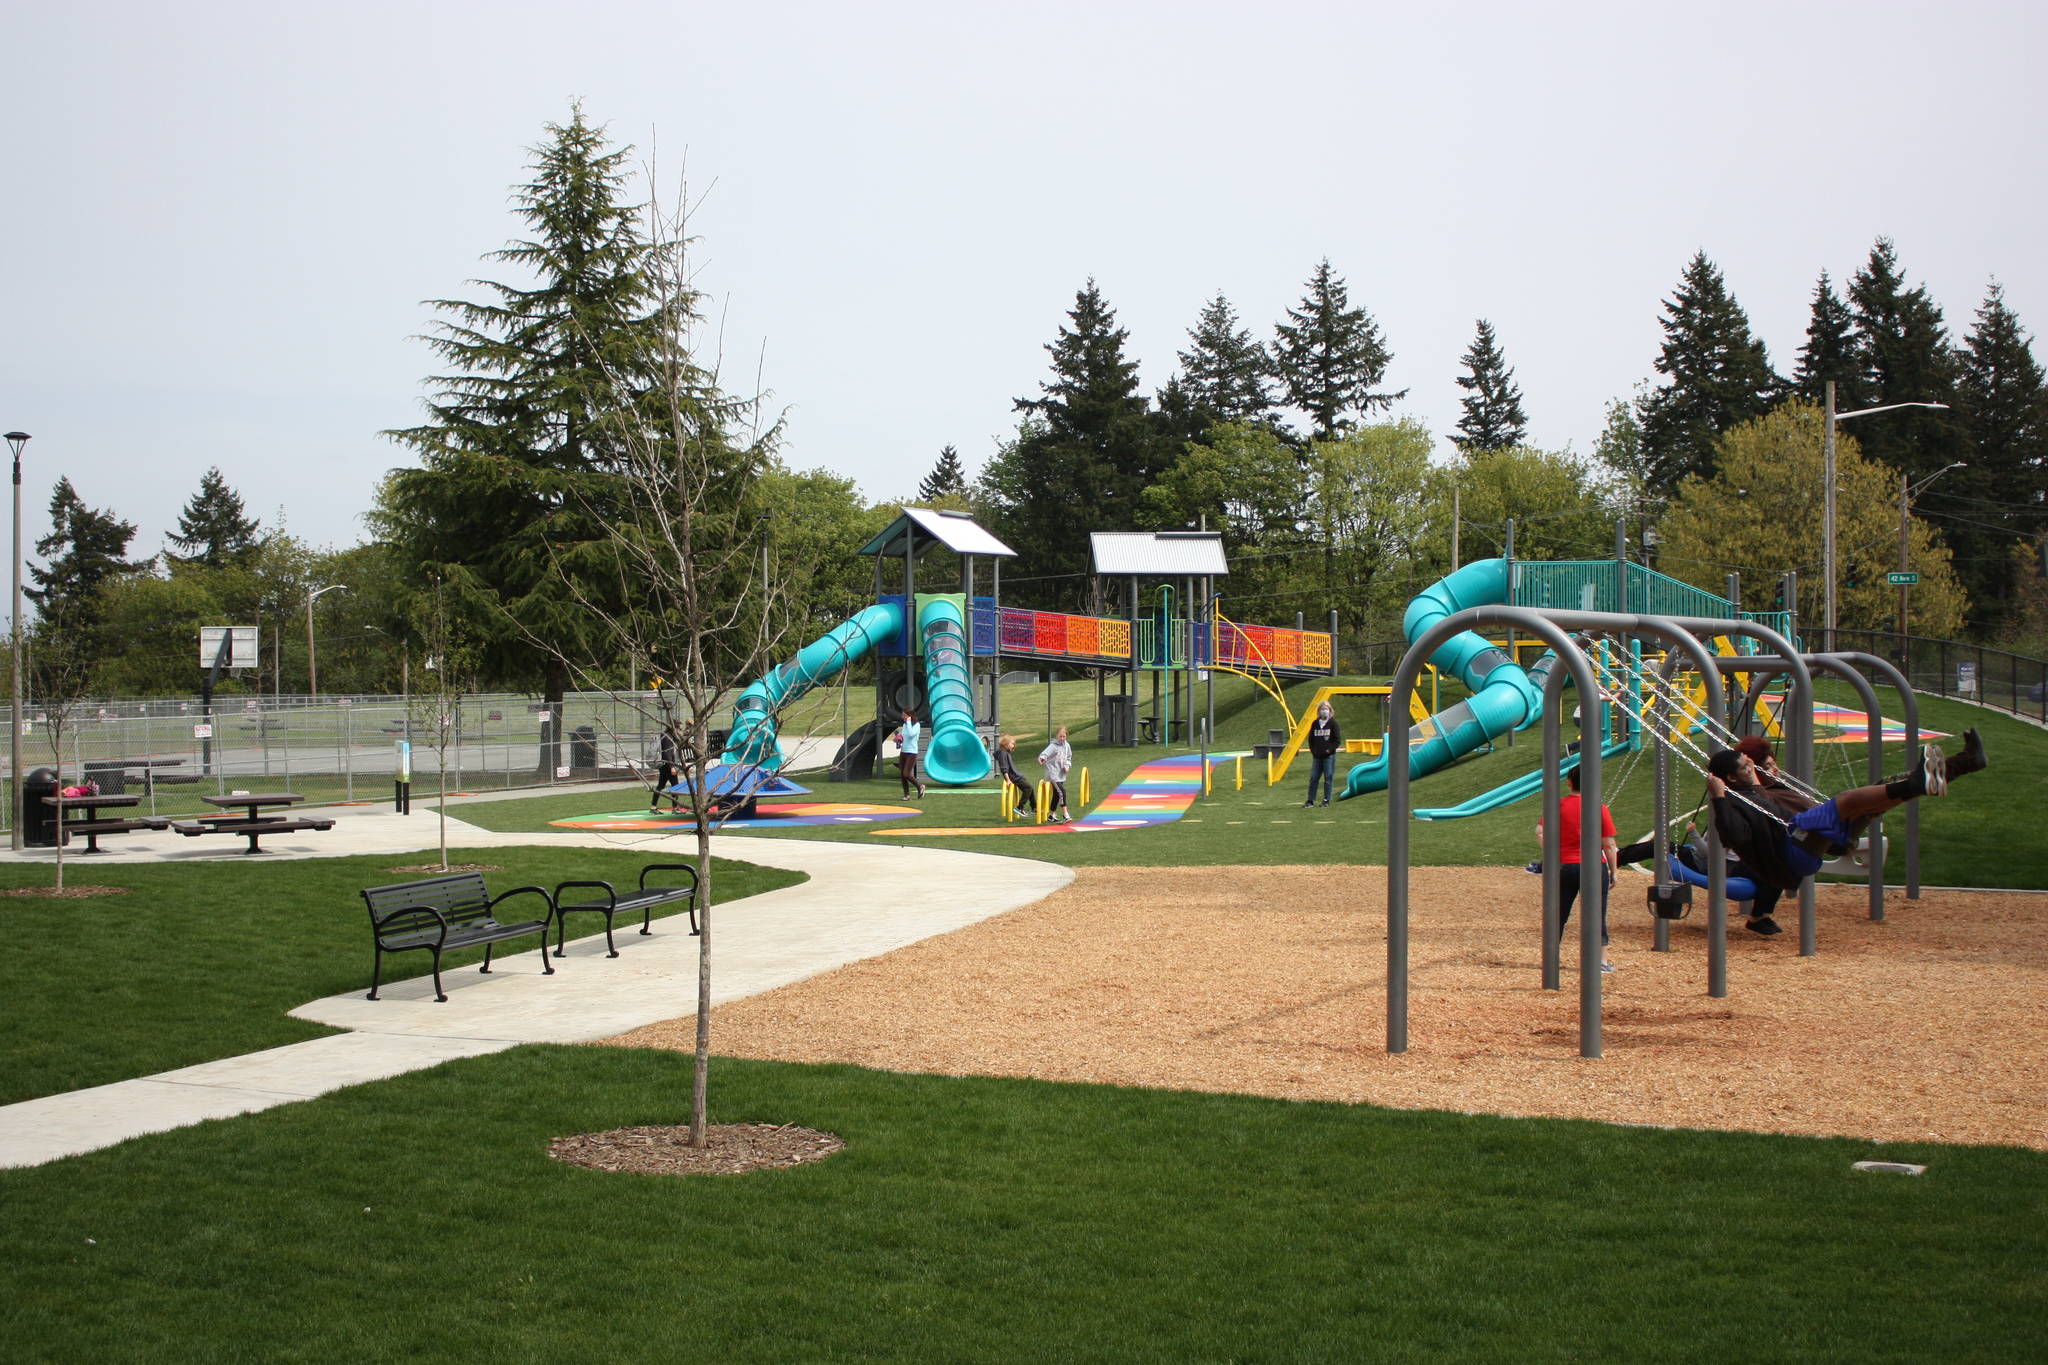 New swing set and playground facilities at West Fenwick Park. CAMERON SHEPPARD, Sound Publishing